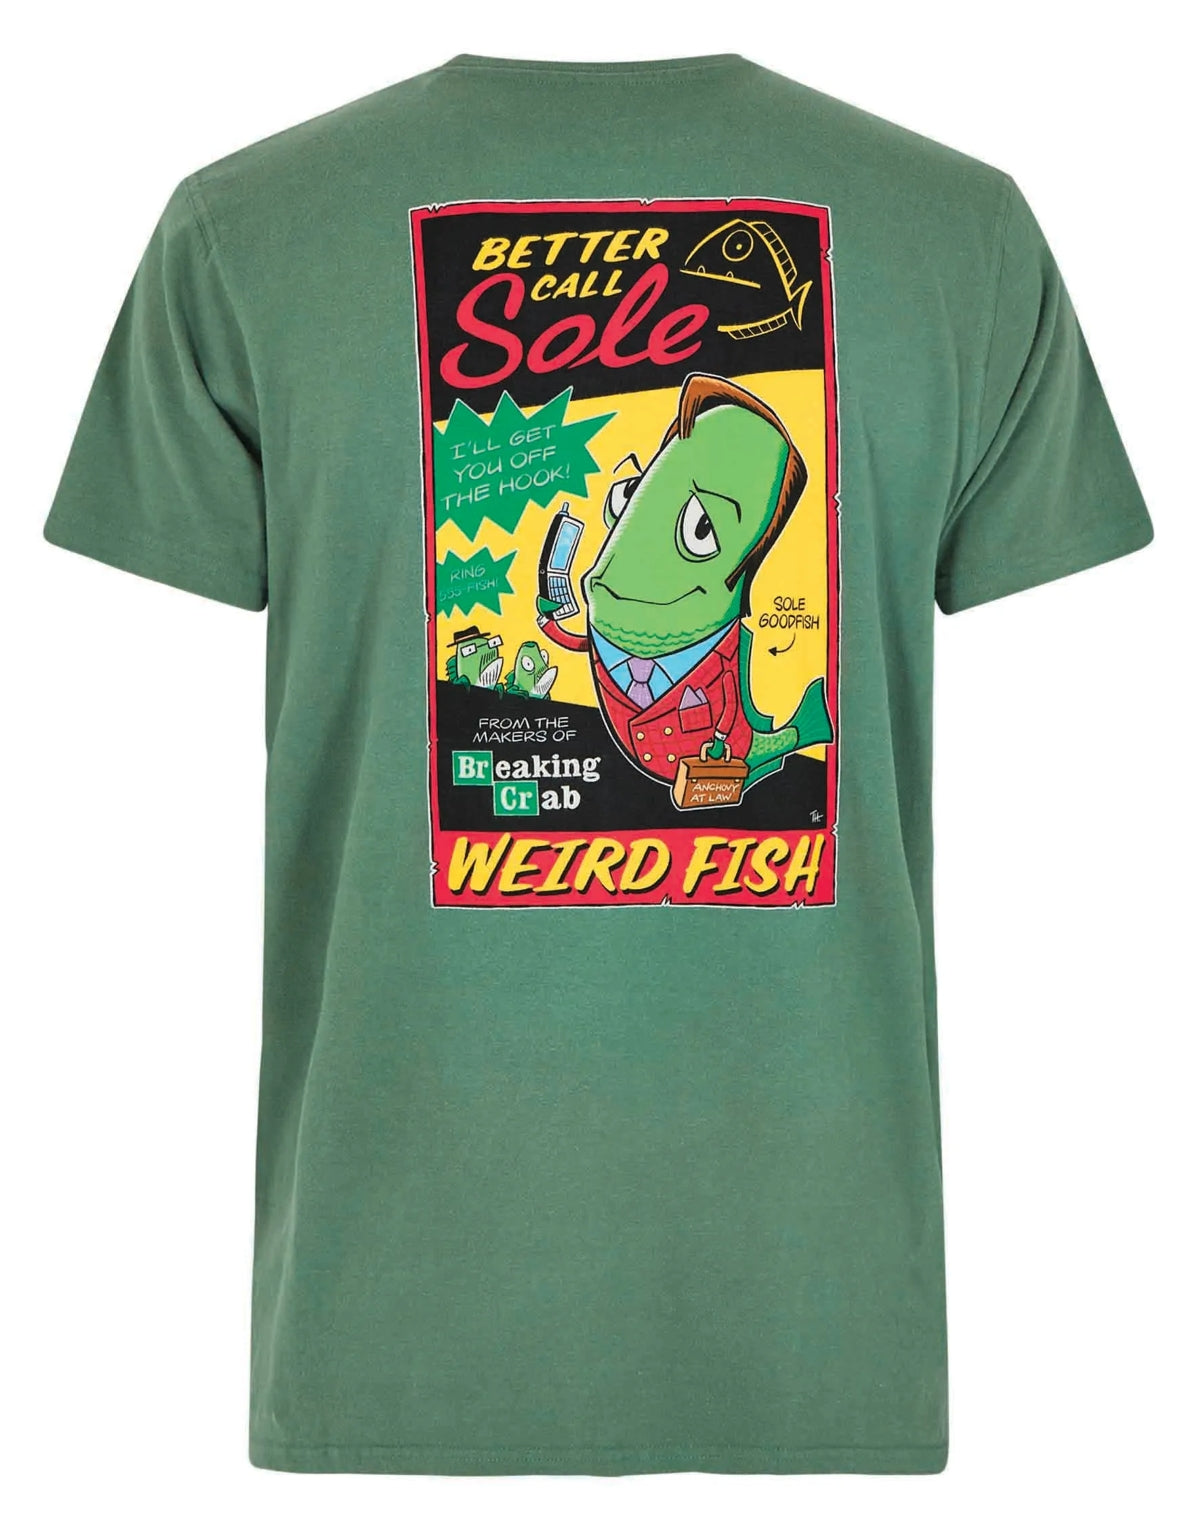 Men's Call Sole printed tee from Weird Fish in Dusky Green, parody of the Better Call Saul TV series.